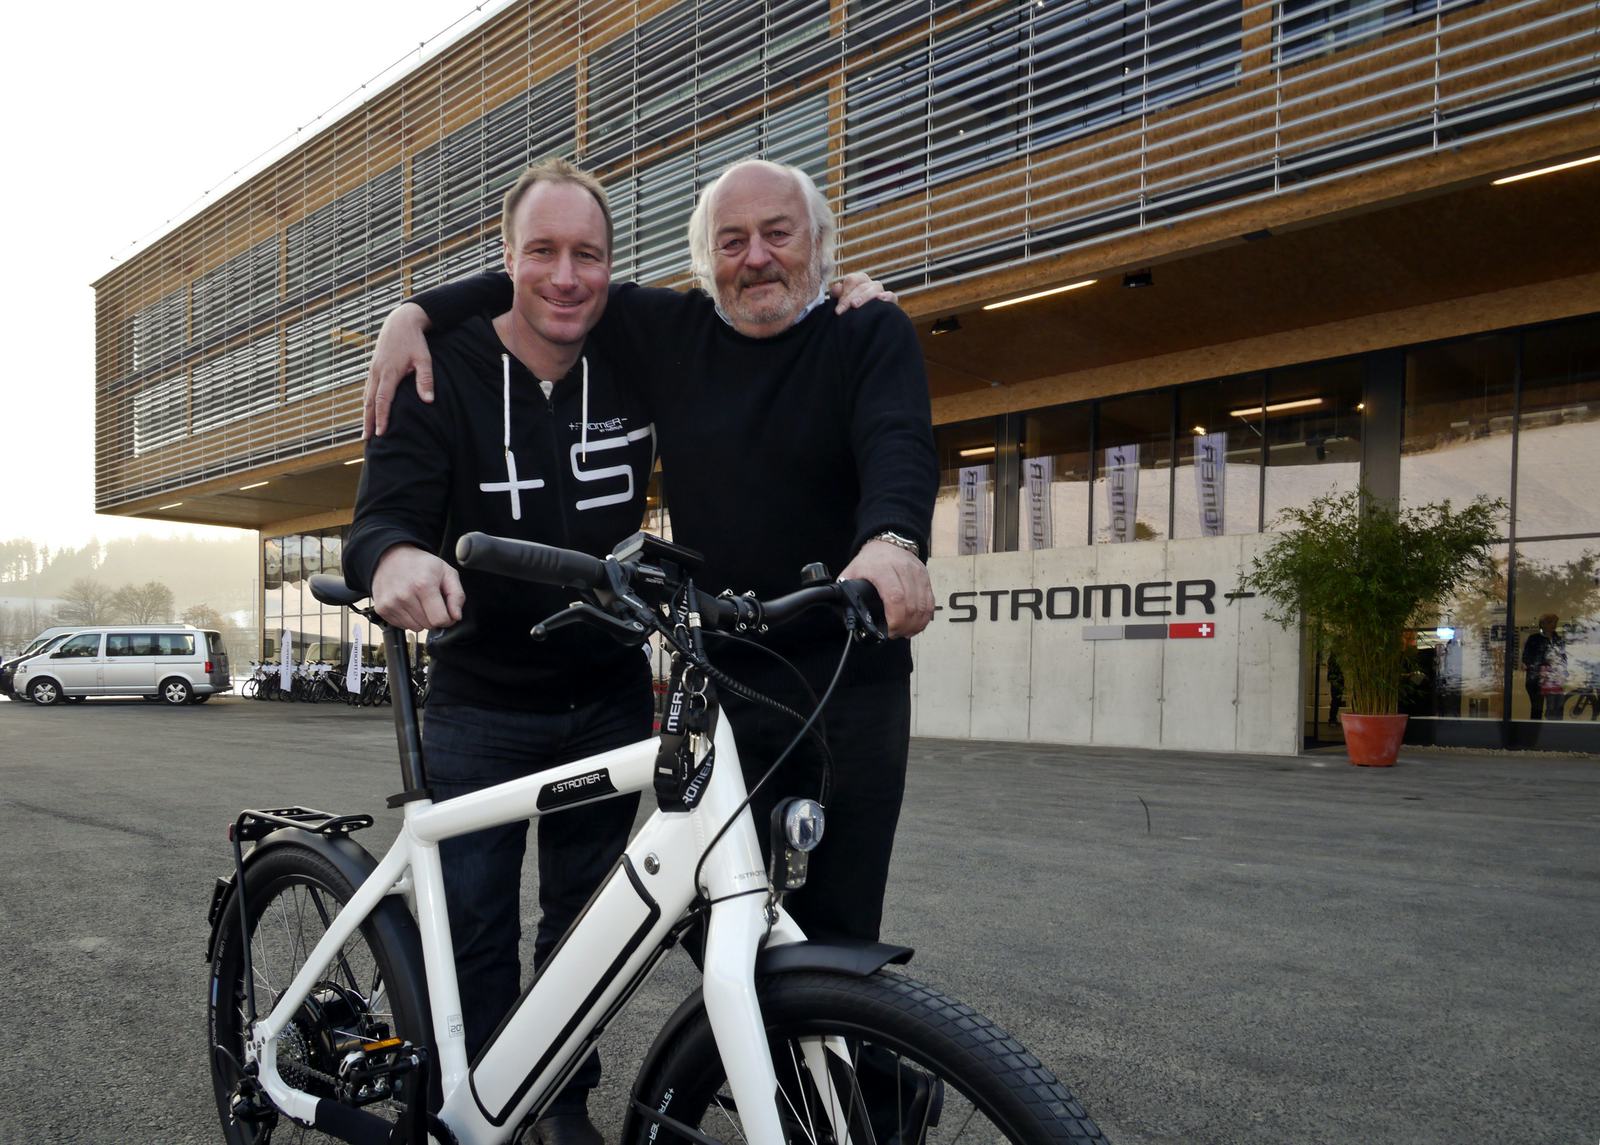 BMC-patron Andy Rihs (r.) with Thomas Binggeli at the opening of the new Stromer plant last spring. – Photo Peter Hummel